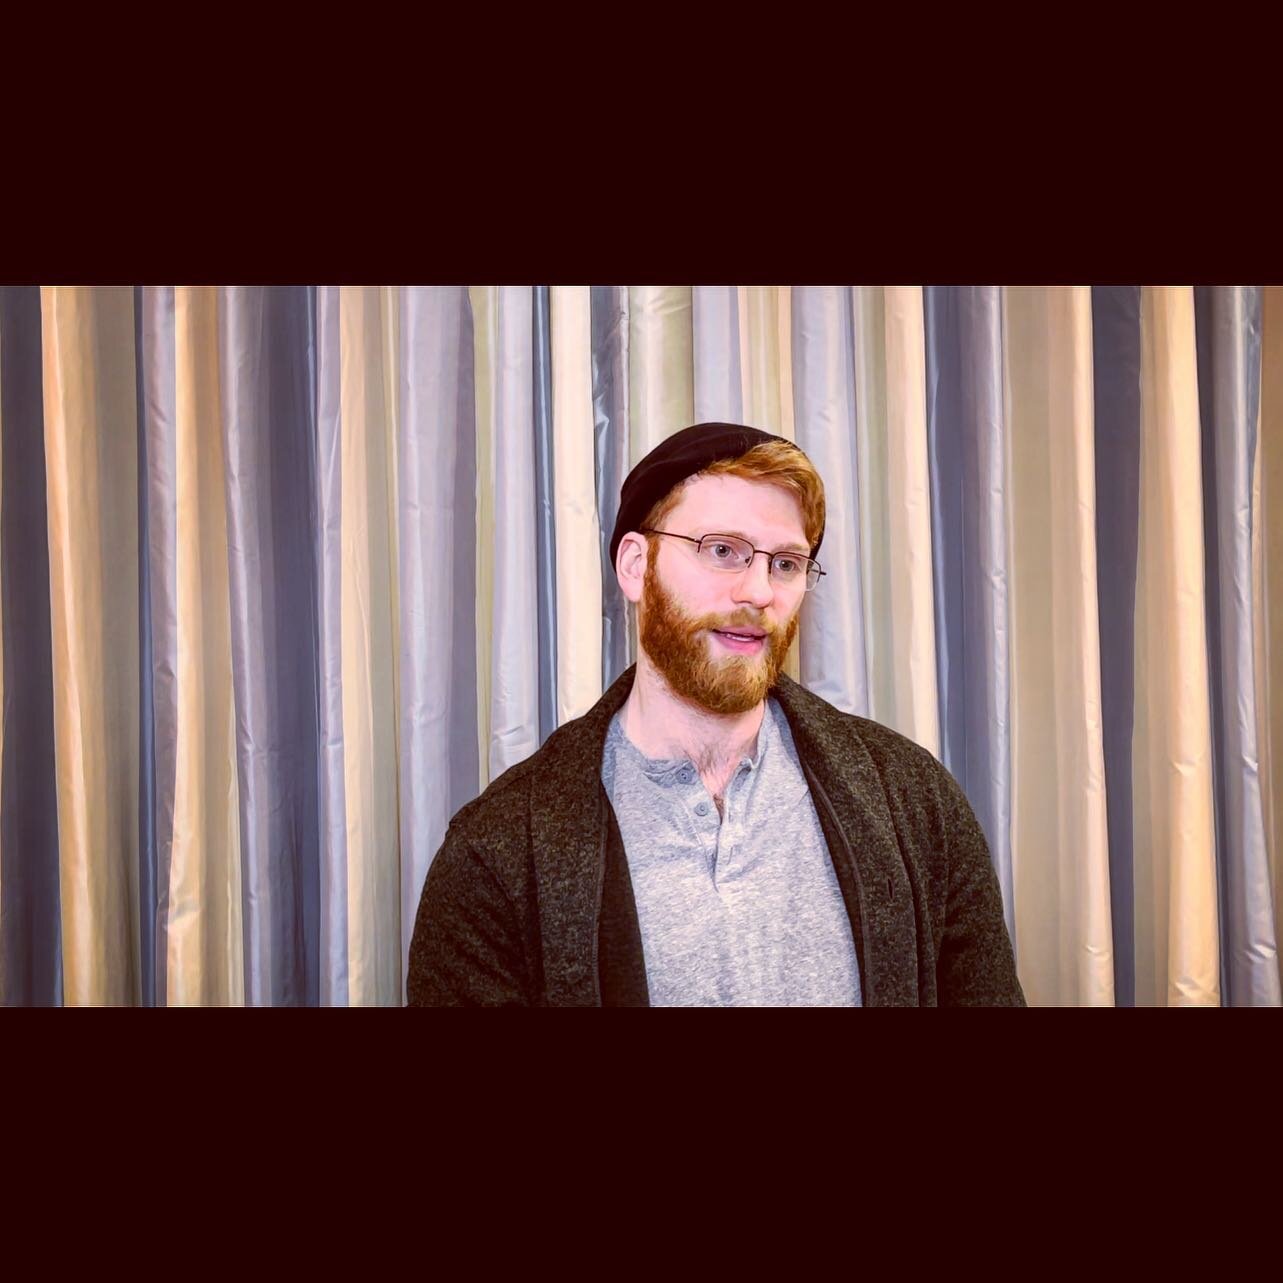 Home audition nerdy tech hipster realness, Take One! I don&rsquo;t like how much I enjoyed looking like this LOL.  #actor #acting #actorslife #audition #selftape #hipster 🎥 🎞 📺